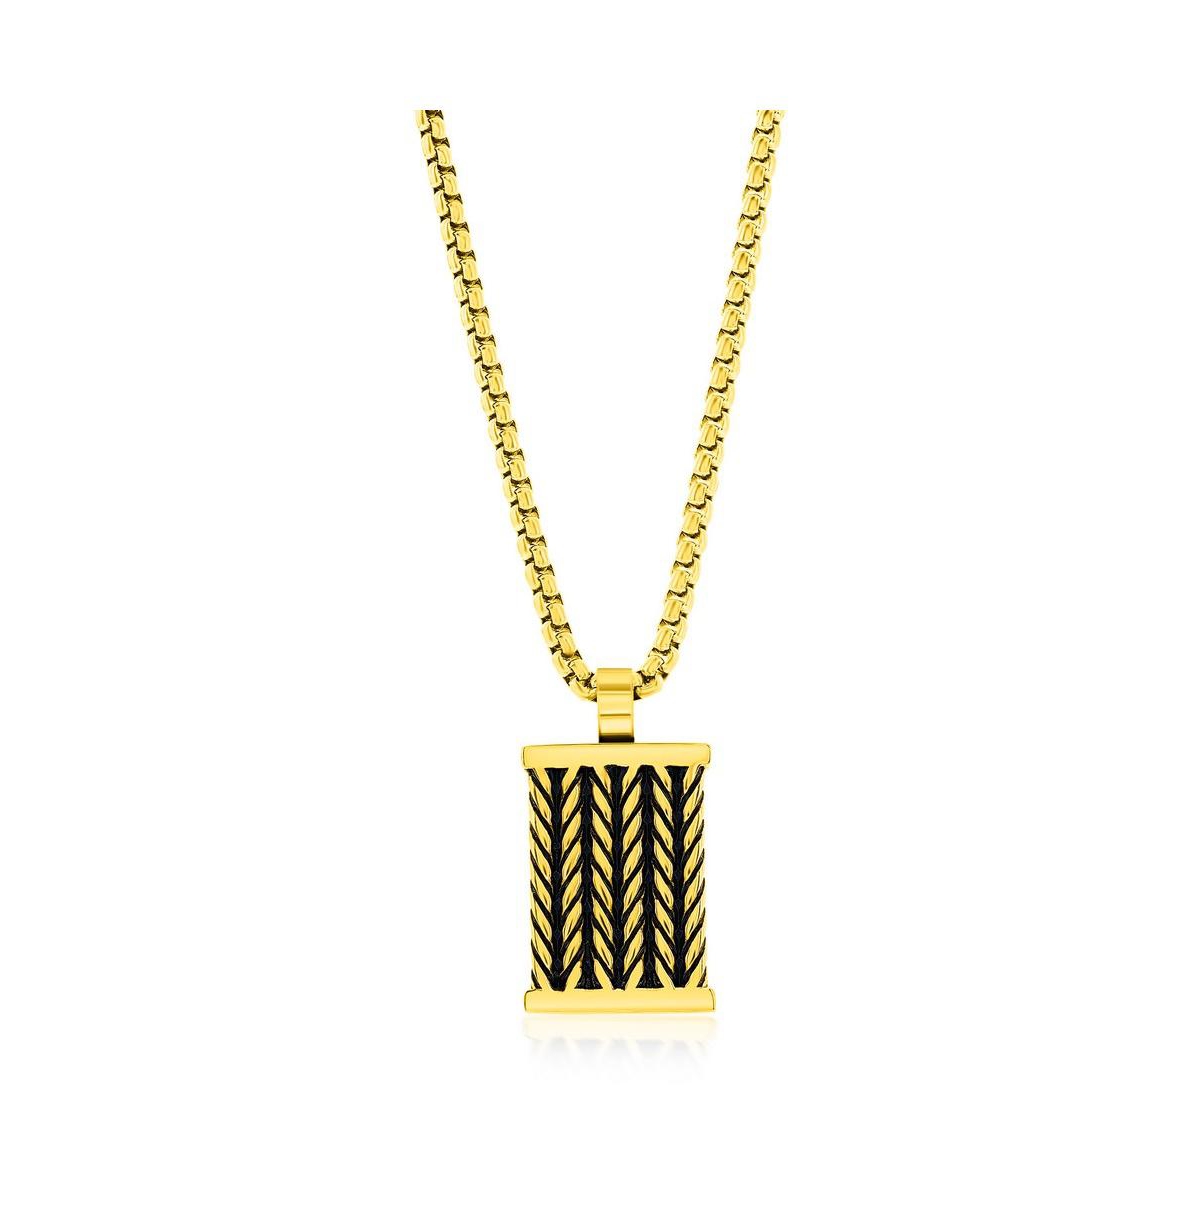 Stainless Steel Rectangle Chevron Design Necklace - Gold